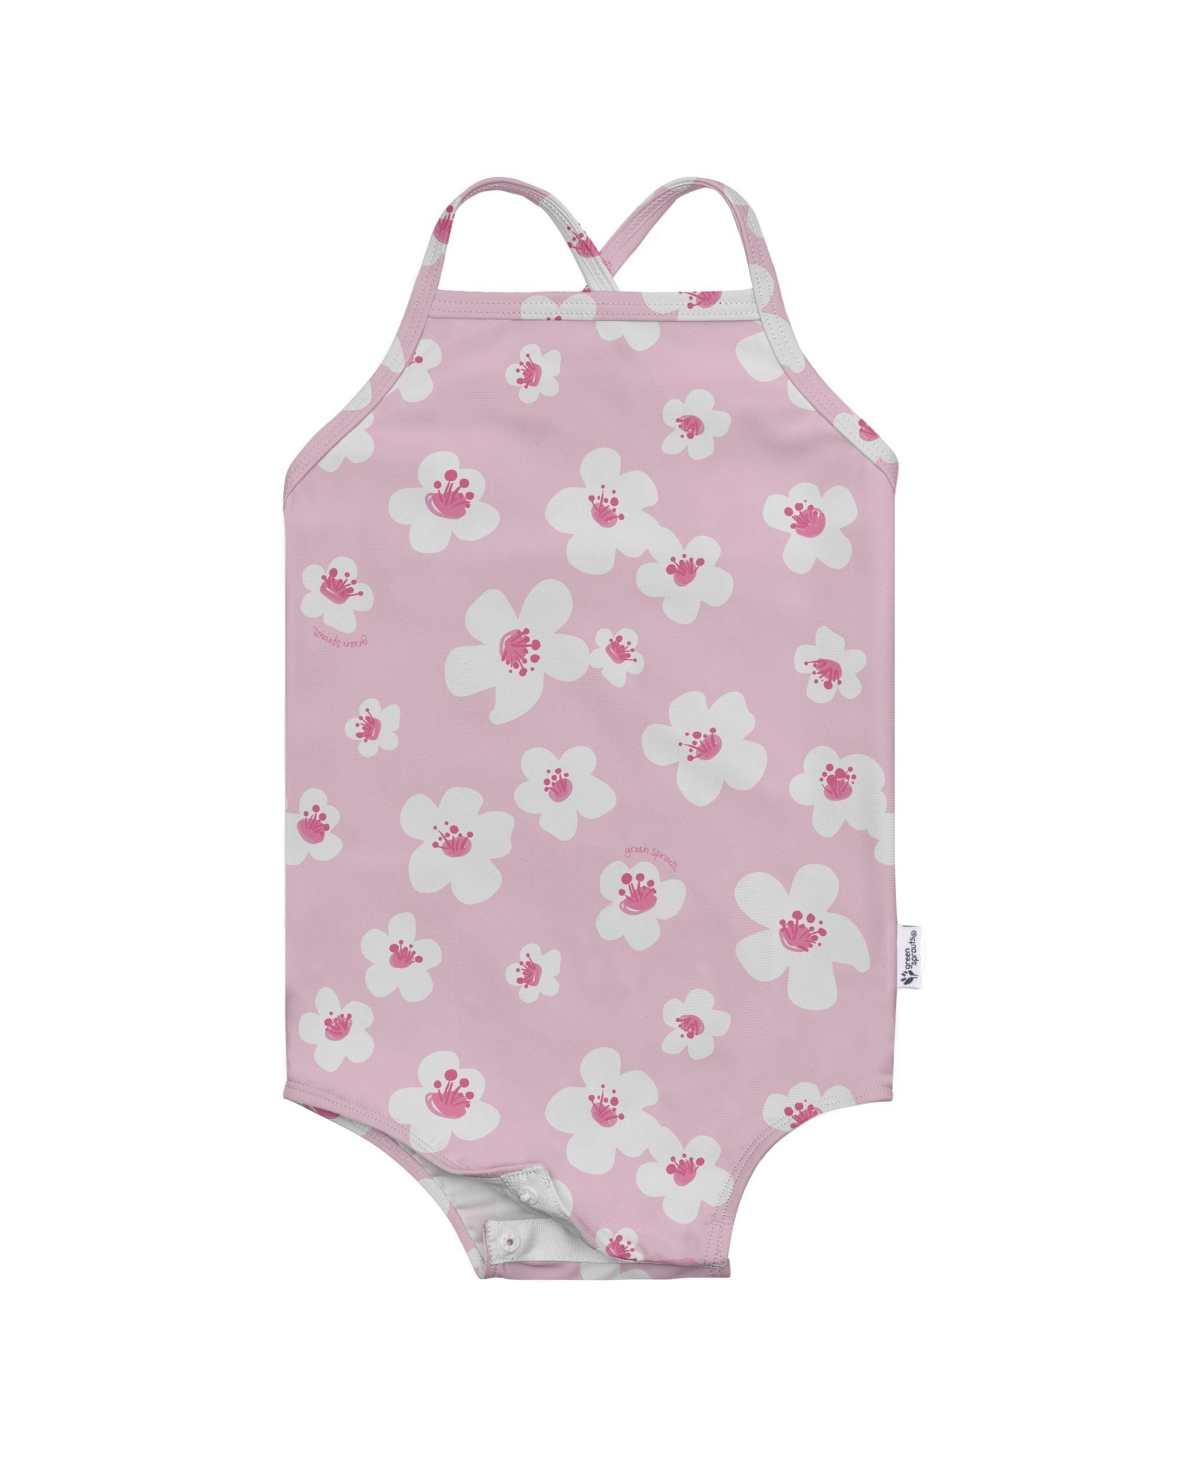 Green Sprouts Baby Girls Lightweight Easy Change Swimsuit In Light Pink Large Blossoms